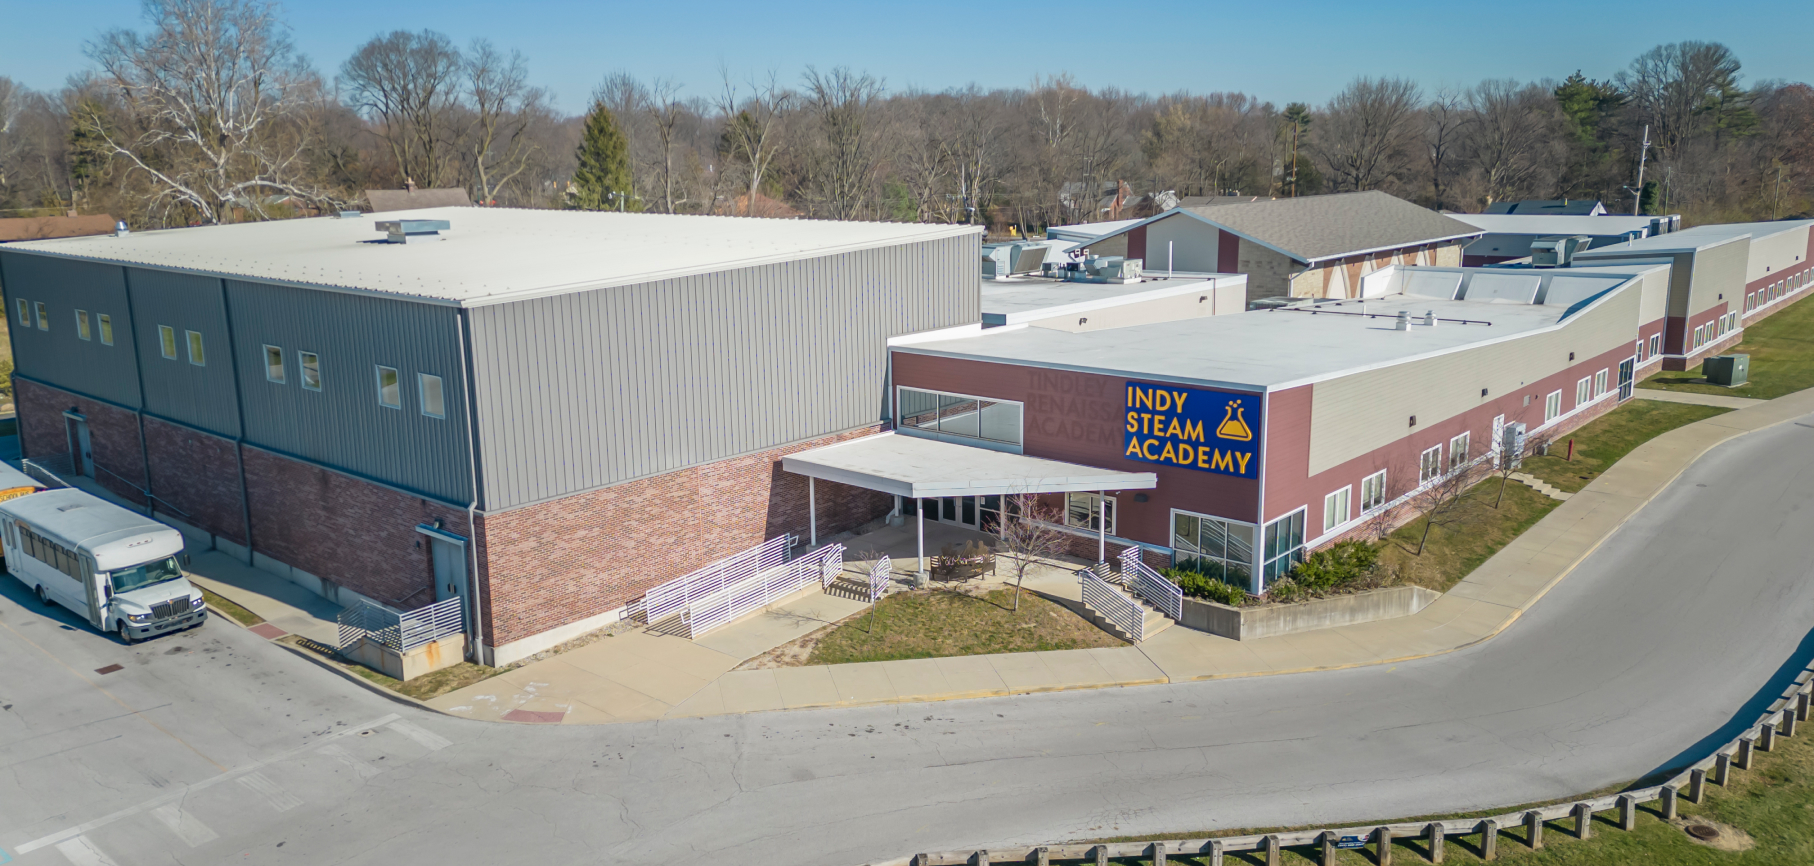 Exterior aerial view of Indy STEAM Academy building